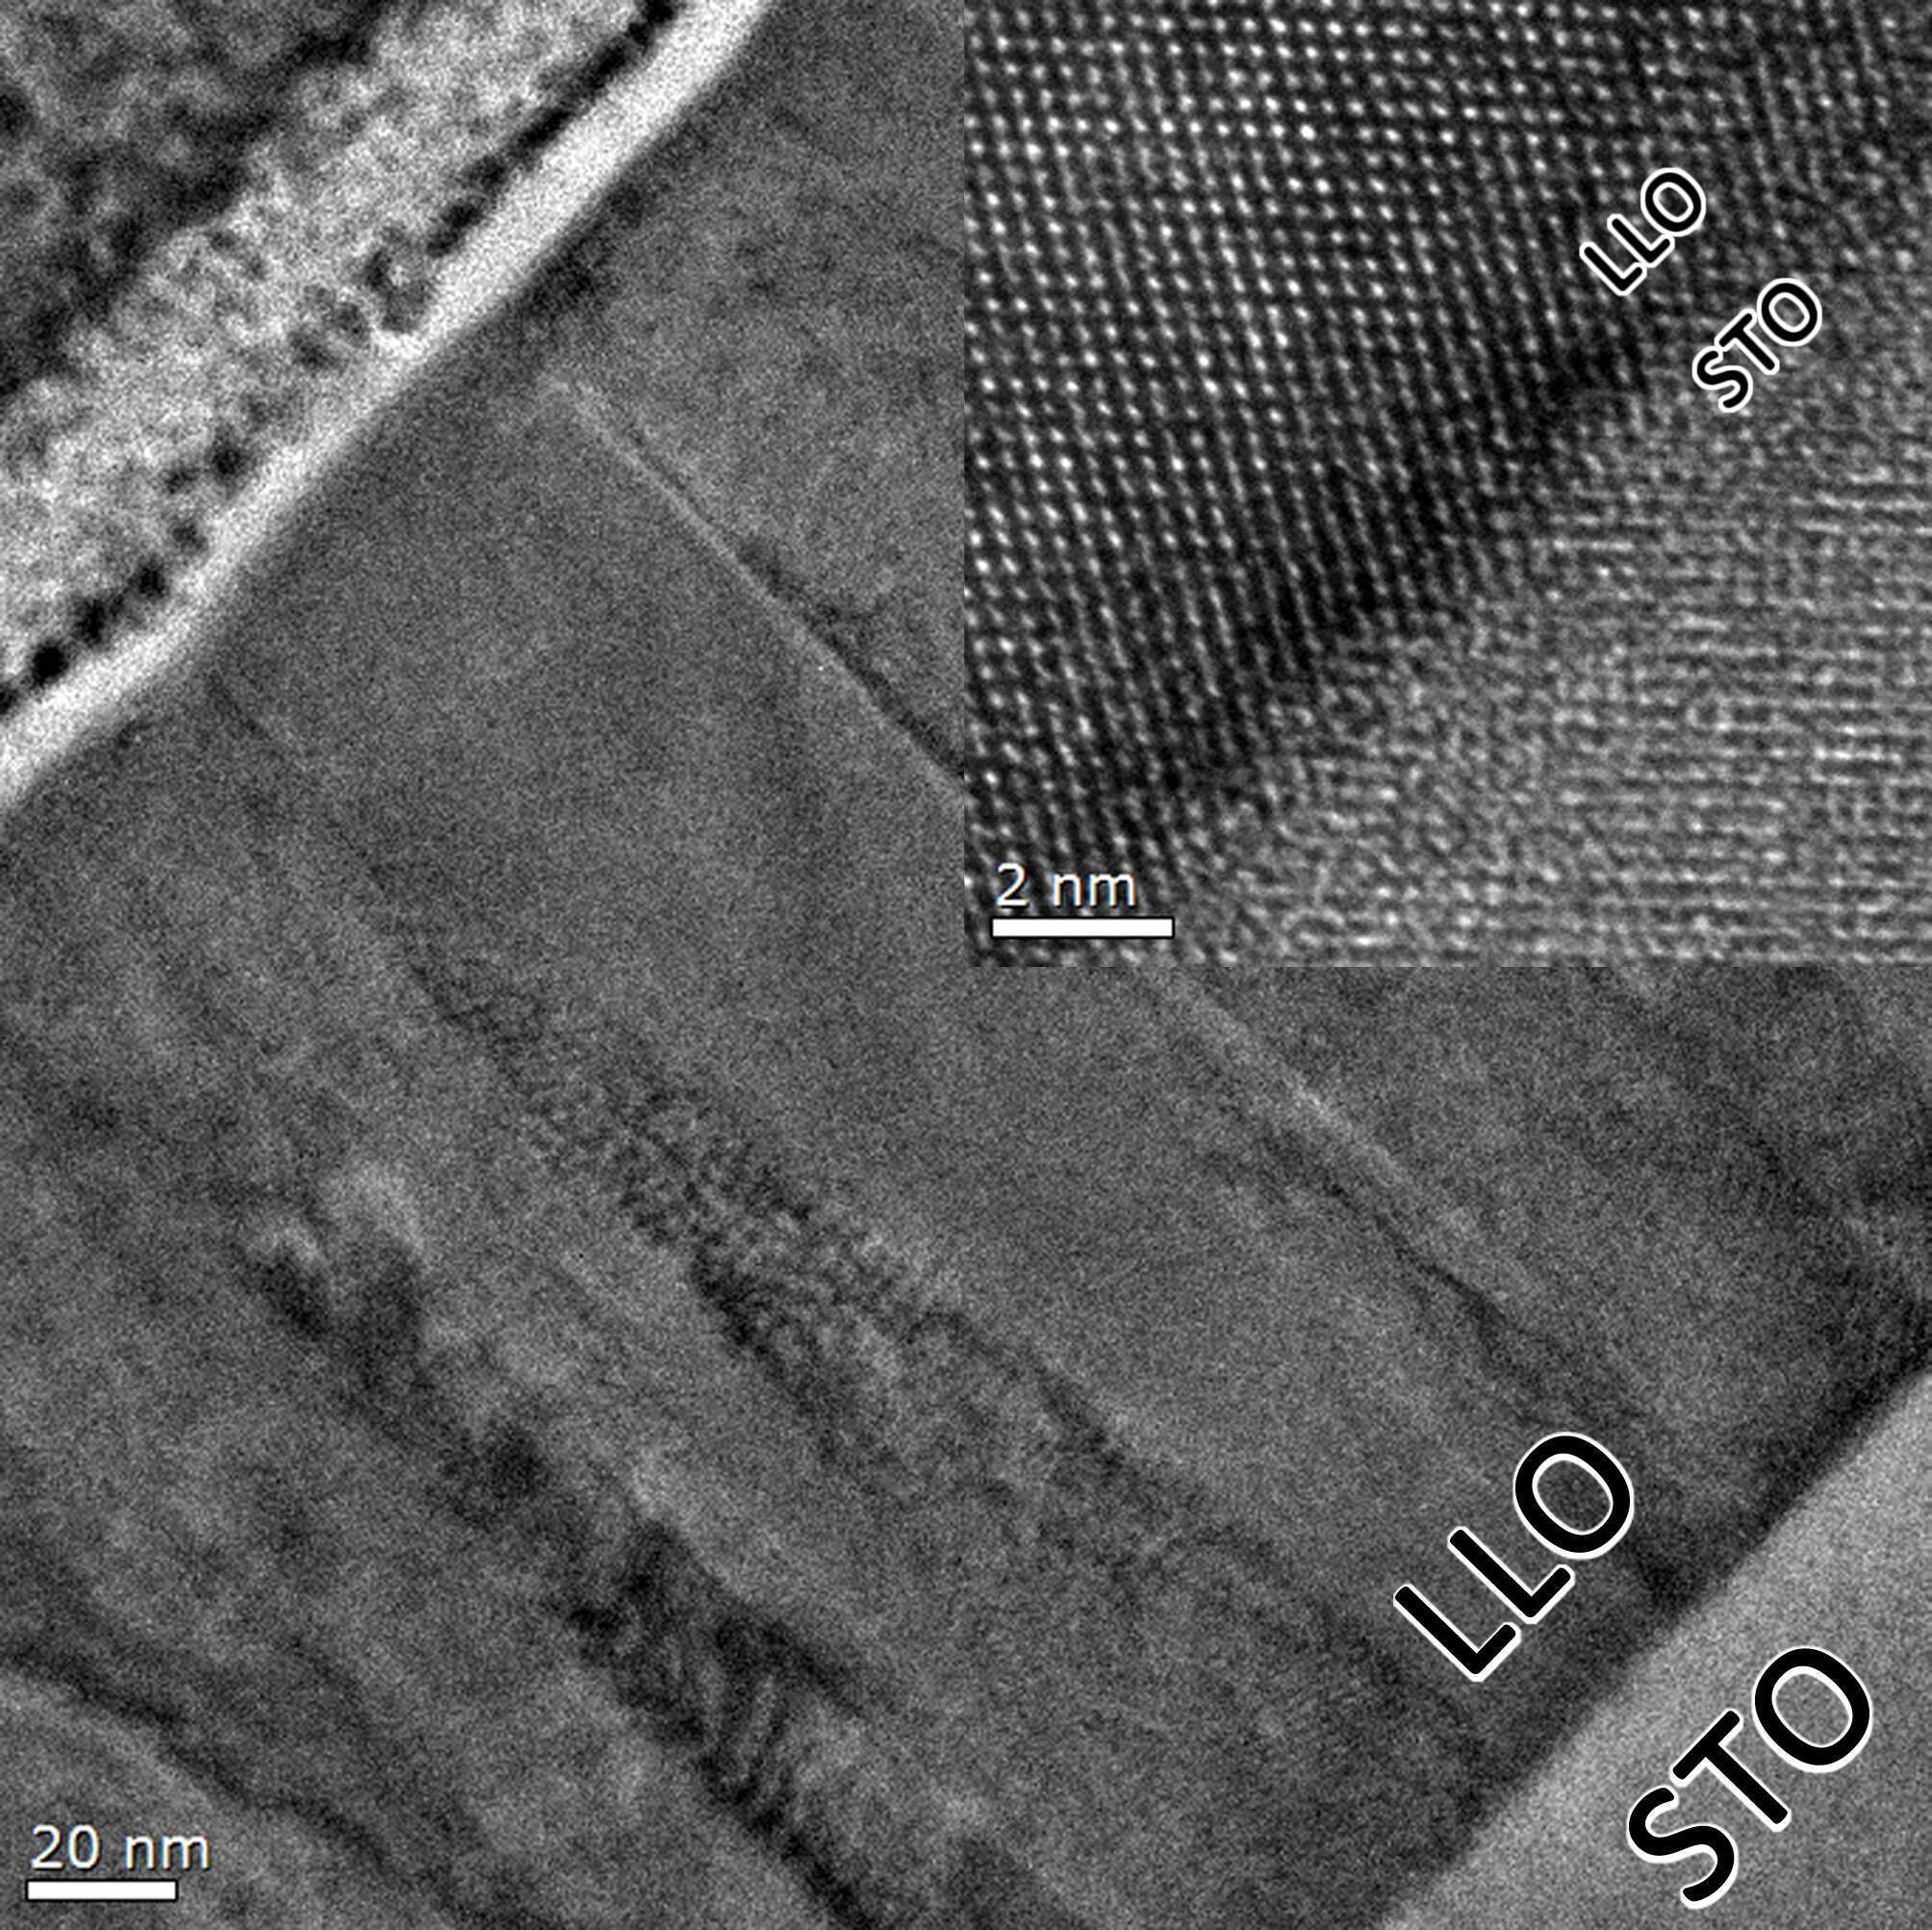 TEM micrograph of the LLO/STO interface with a close-up inset showing the columnar structure and the abrupt interface.